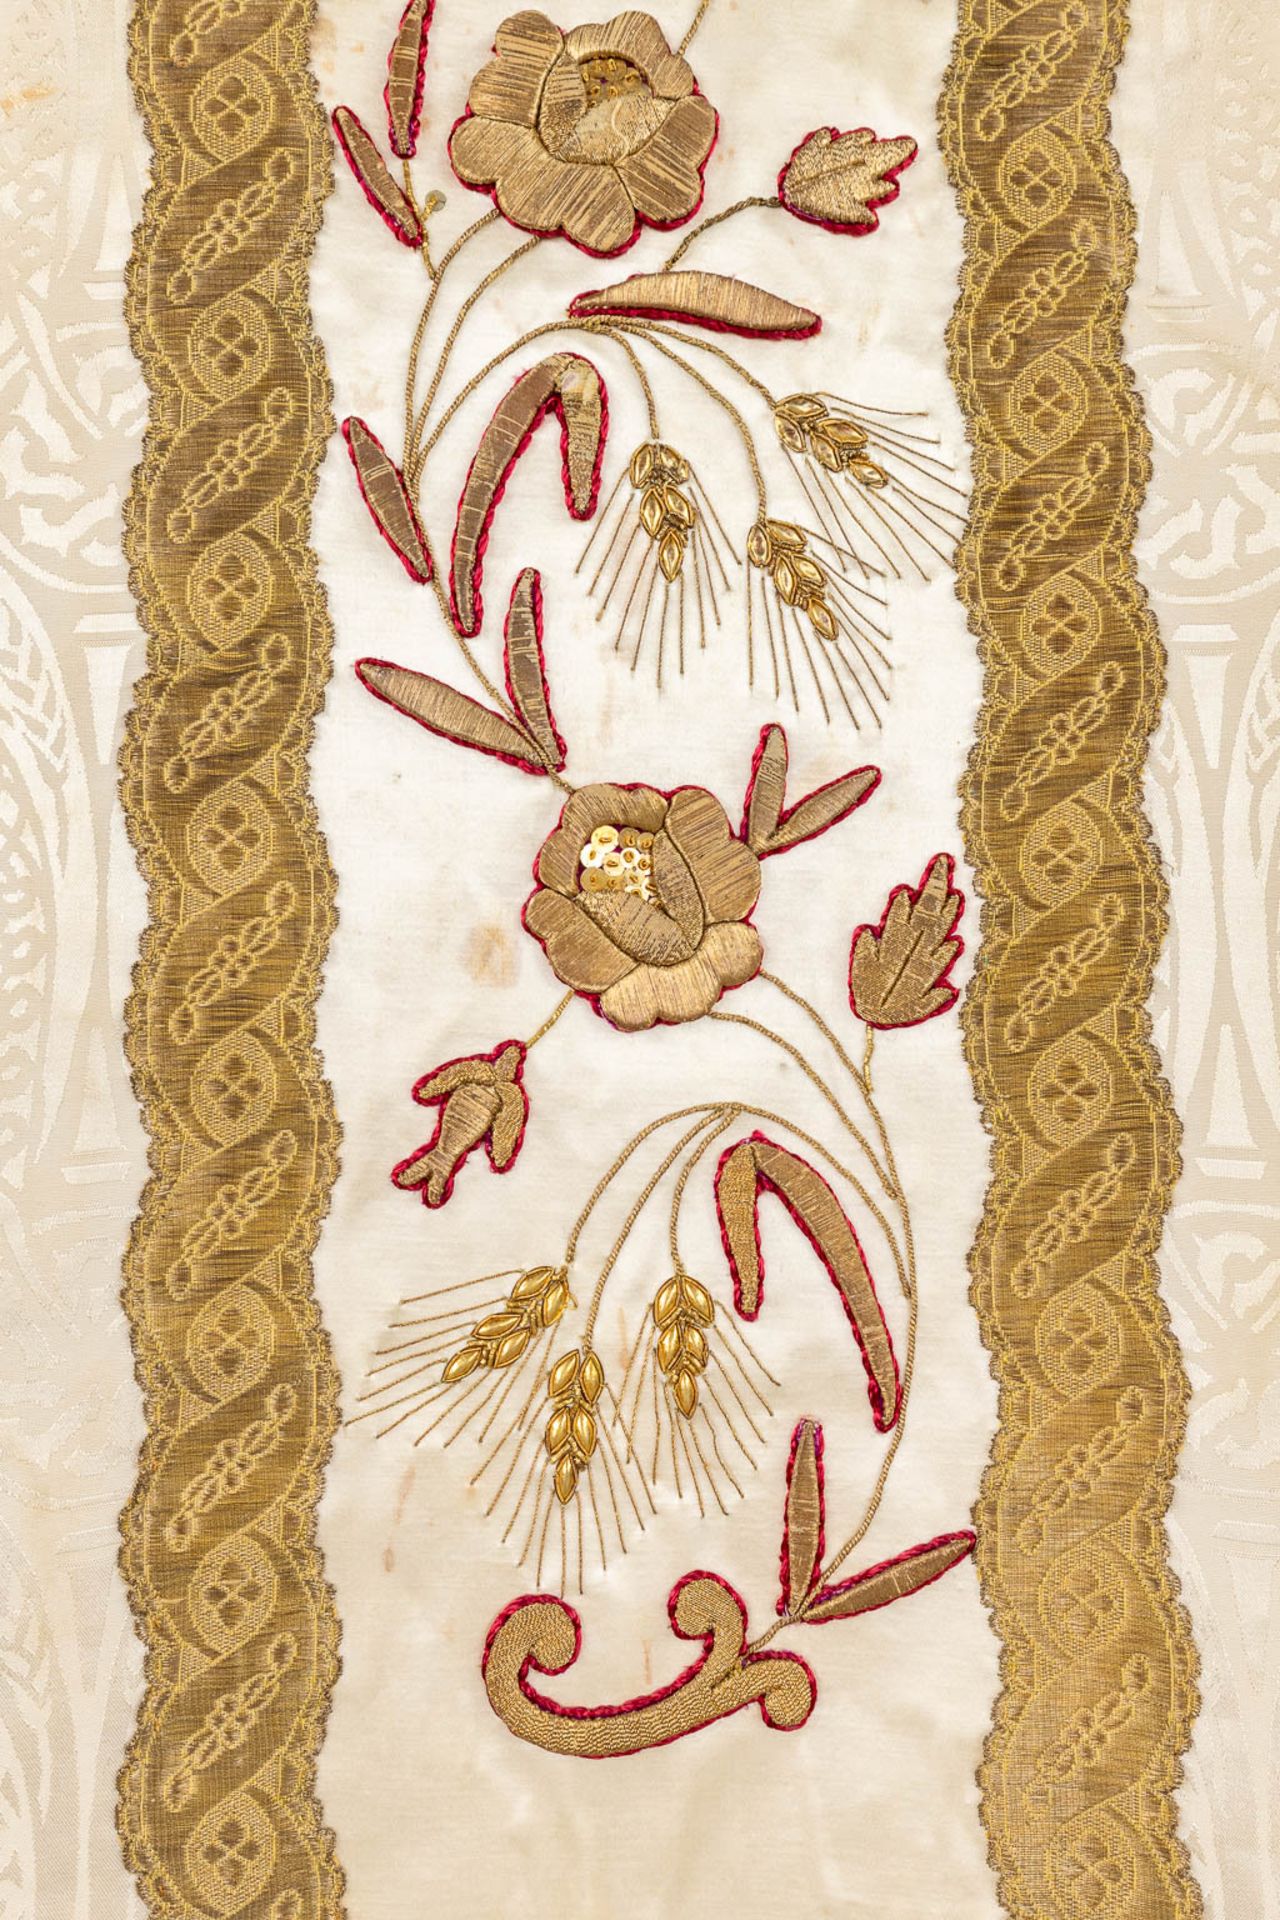 Three Roman Chasubles, Three Stola, thick gold thread embroideries. - Image 26 of 28